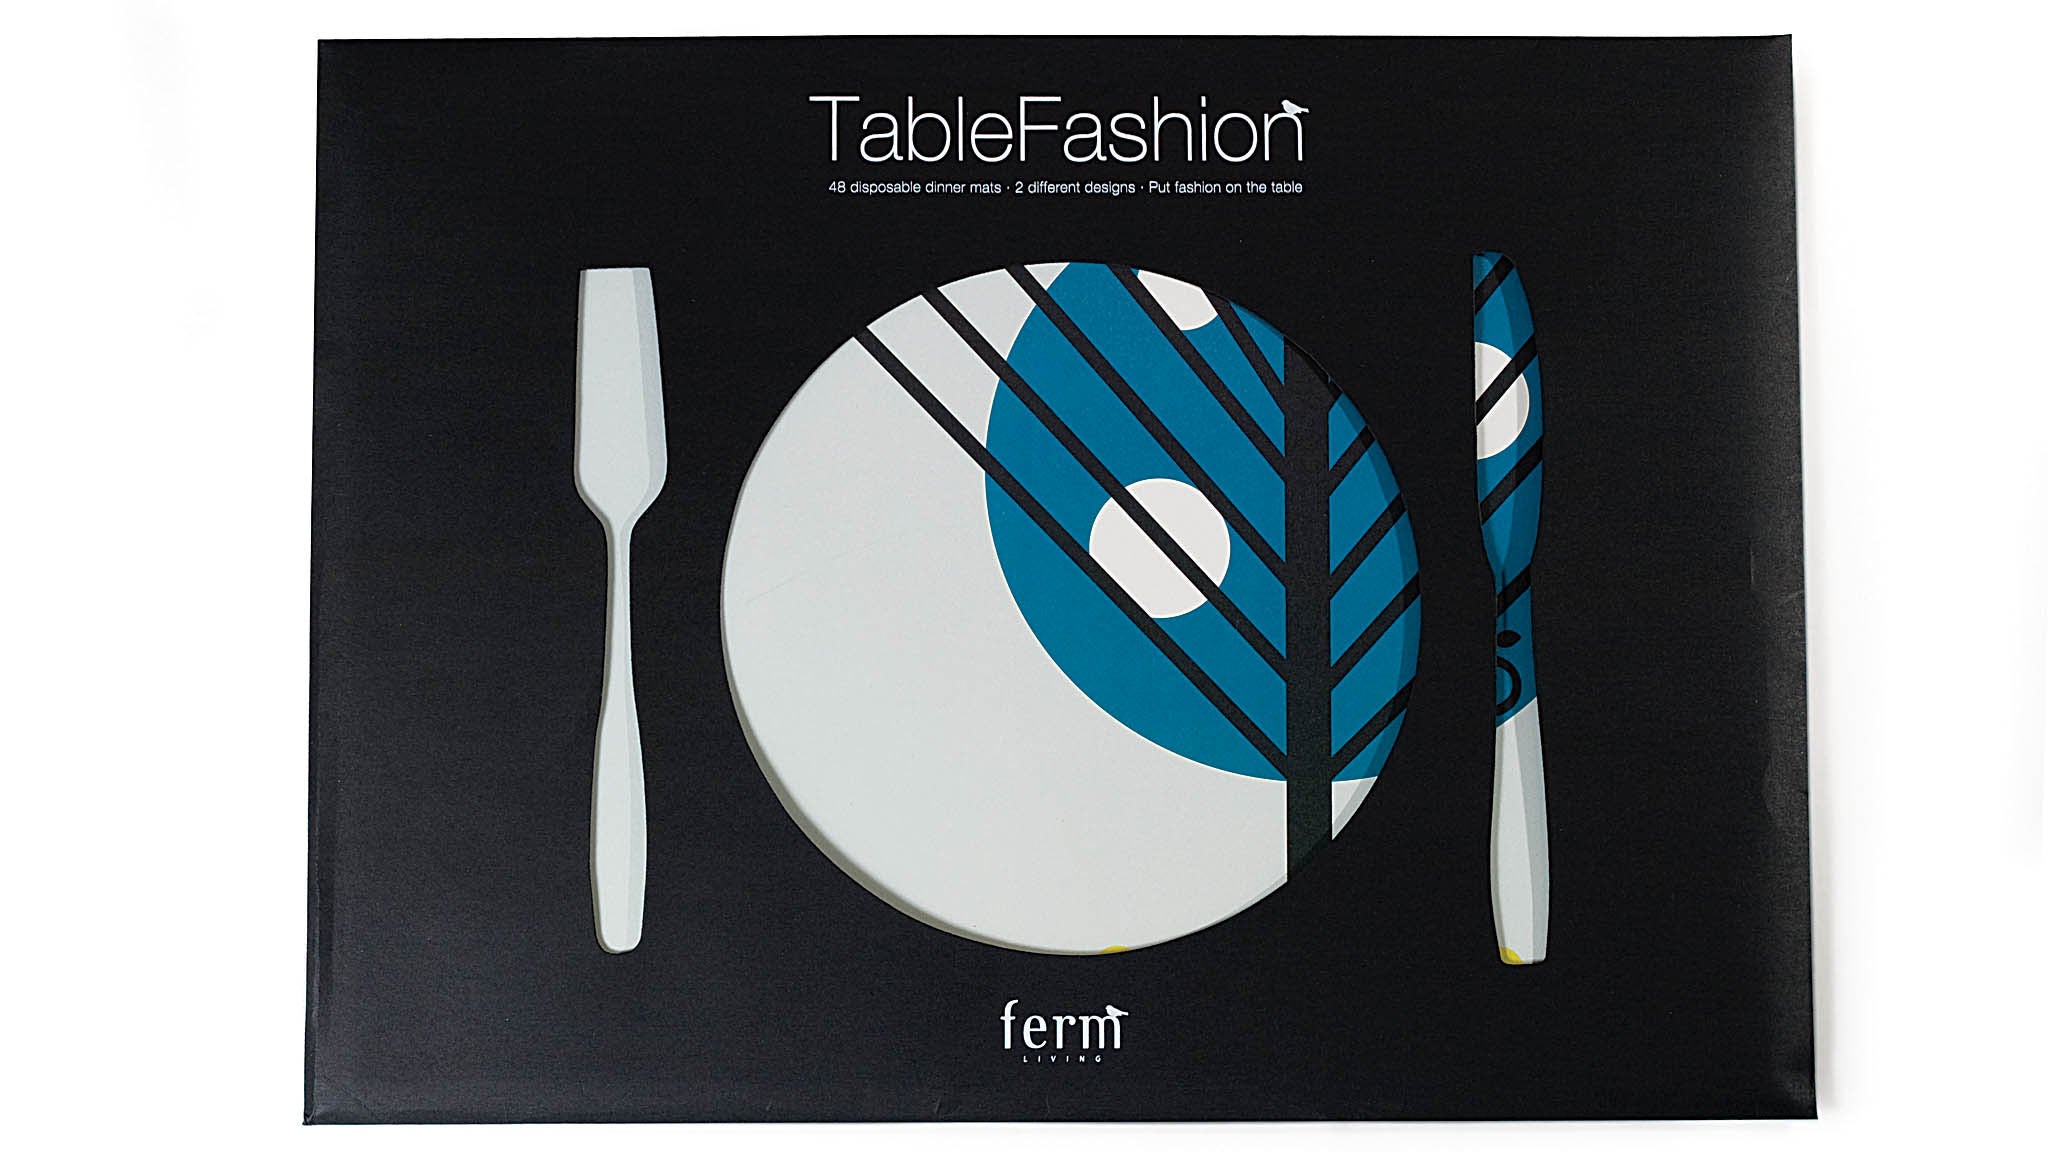 TableFashion: Put fashion on the table with beautiful, graphic and disposable dinner mats. Not only are these paper sheets super practical but they also turn any table into a graphic masterpiece in no time. One set contains 48 sheets, 24 of each design. 